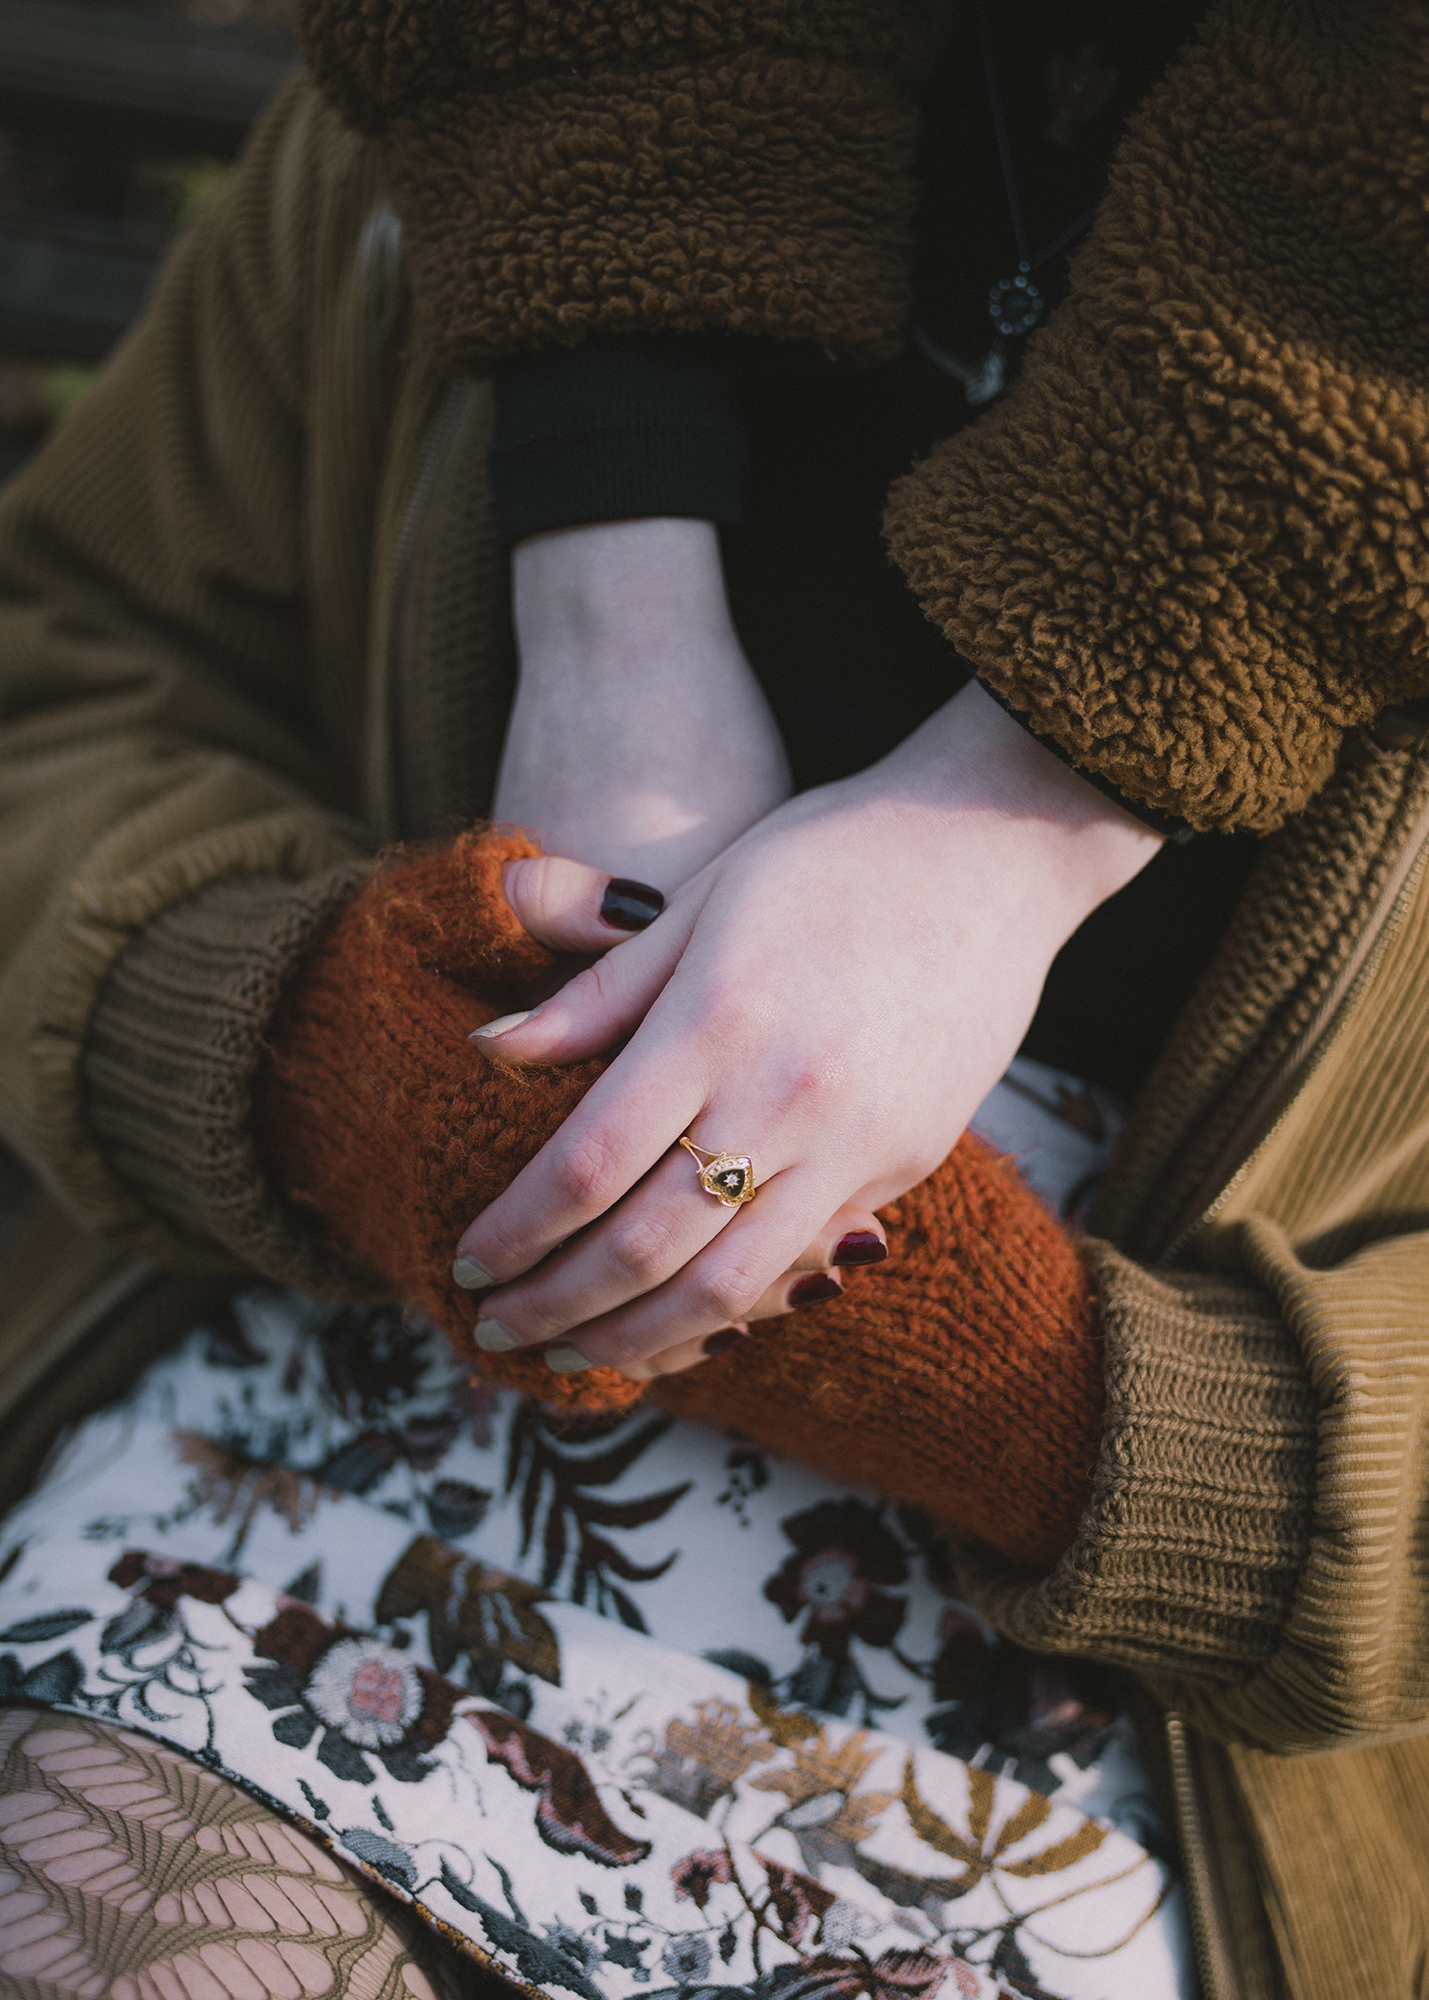 BA Photography work by Nicola Faye Bates showing a colourful portrait of a couple's hands intertwined.